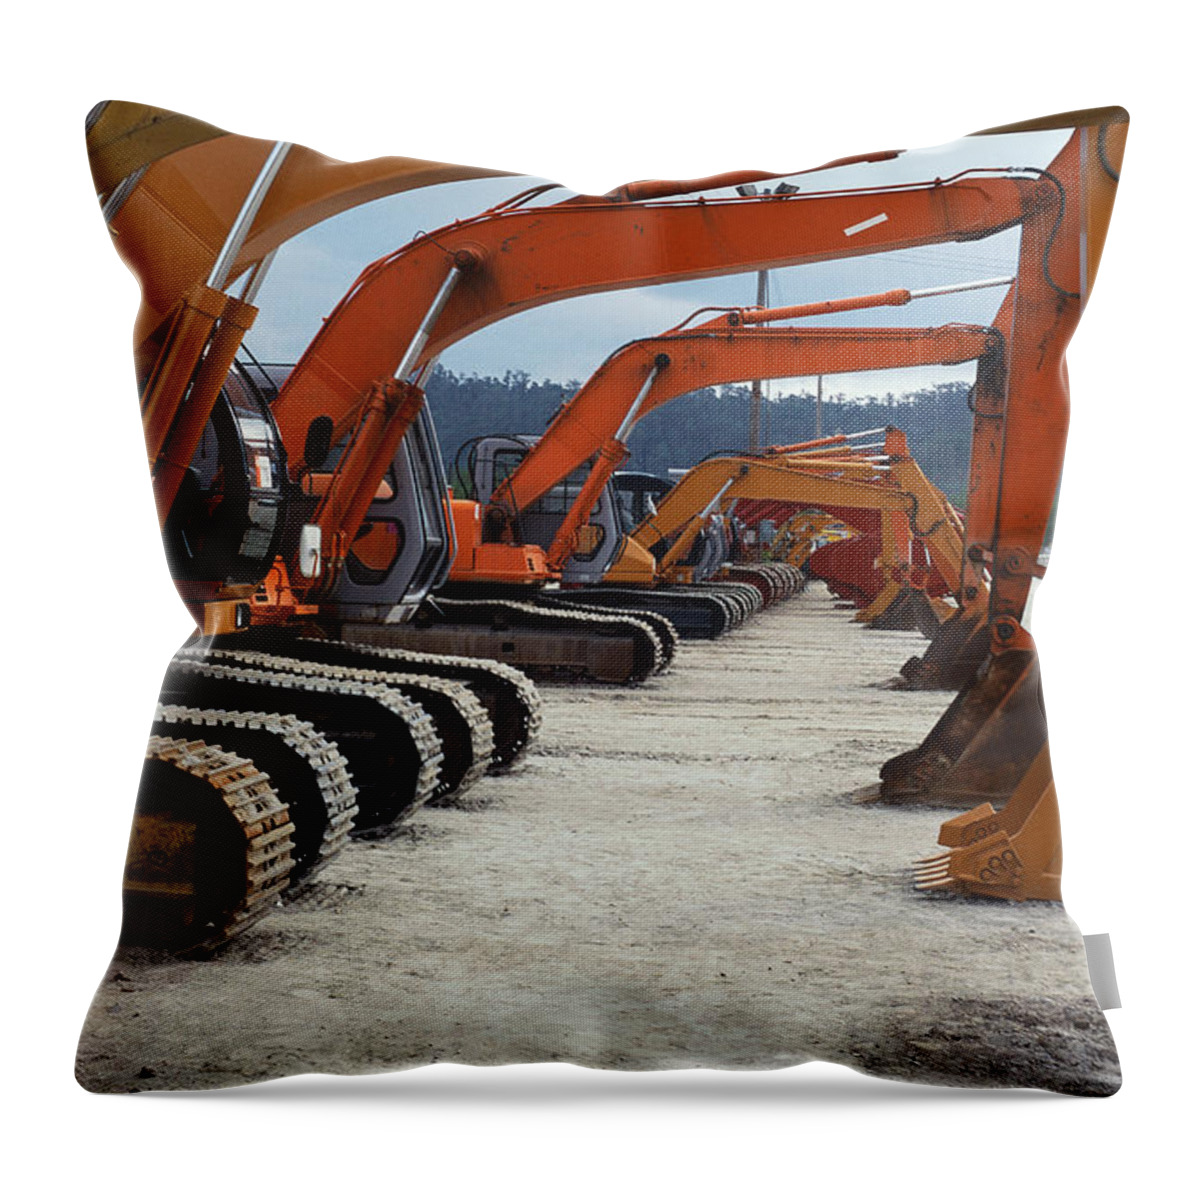 In A Row Throw Pillow featuring the photograph Cranes In Row by Neil Beer